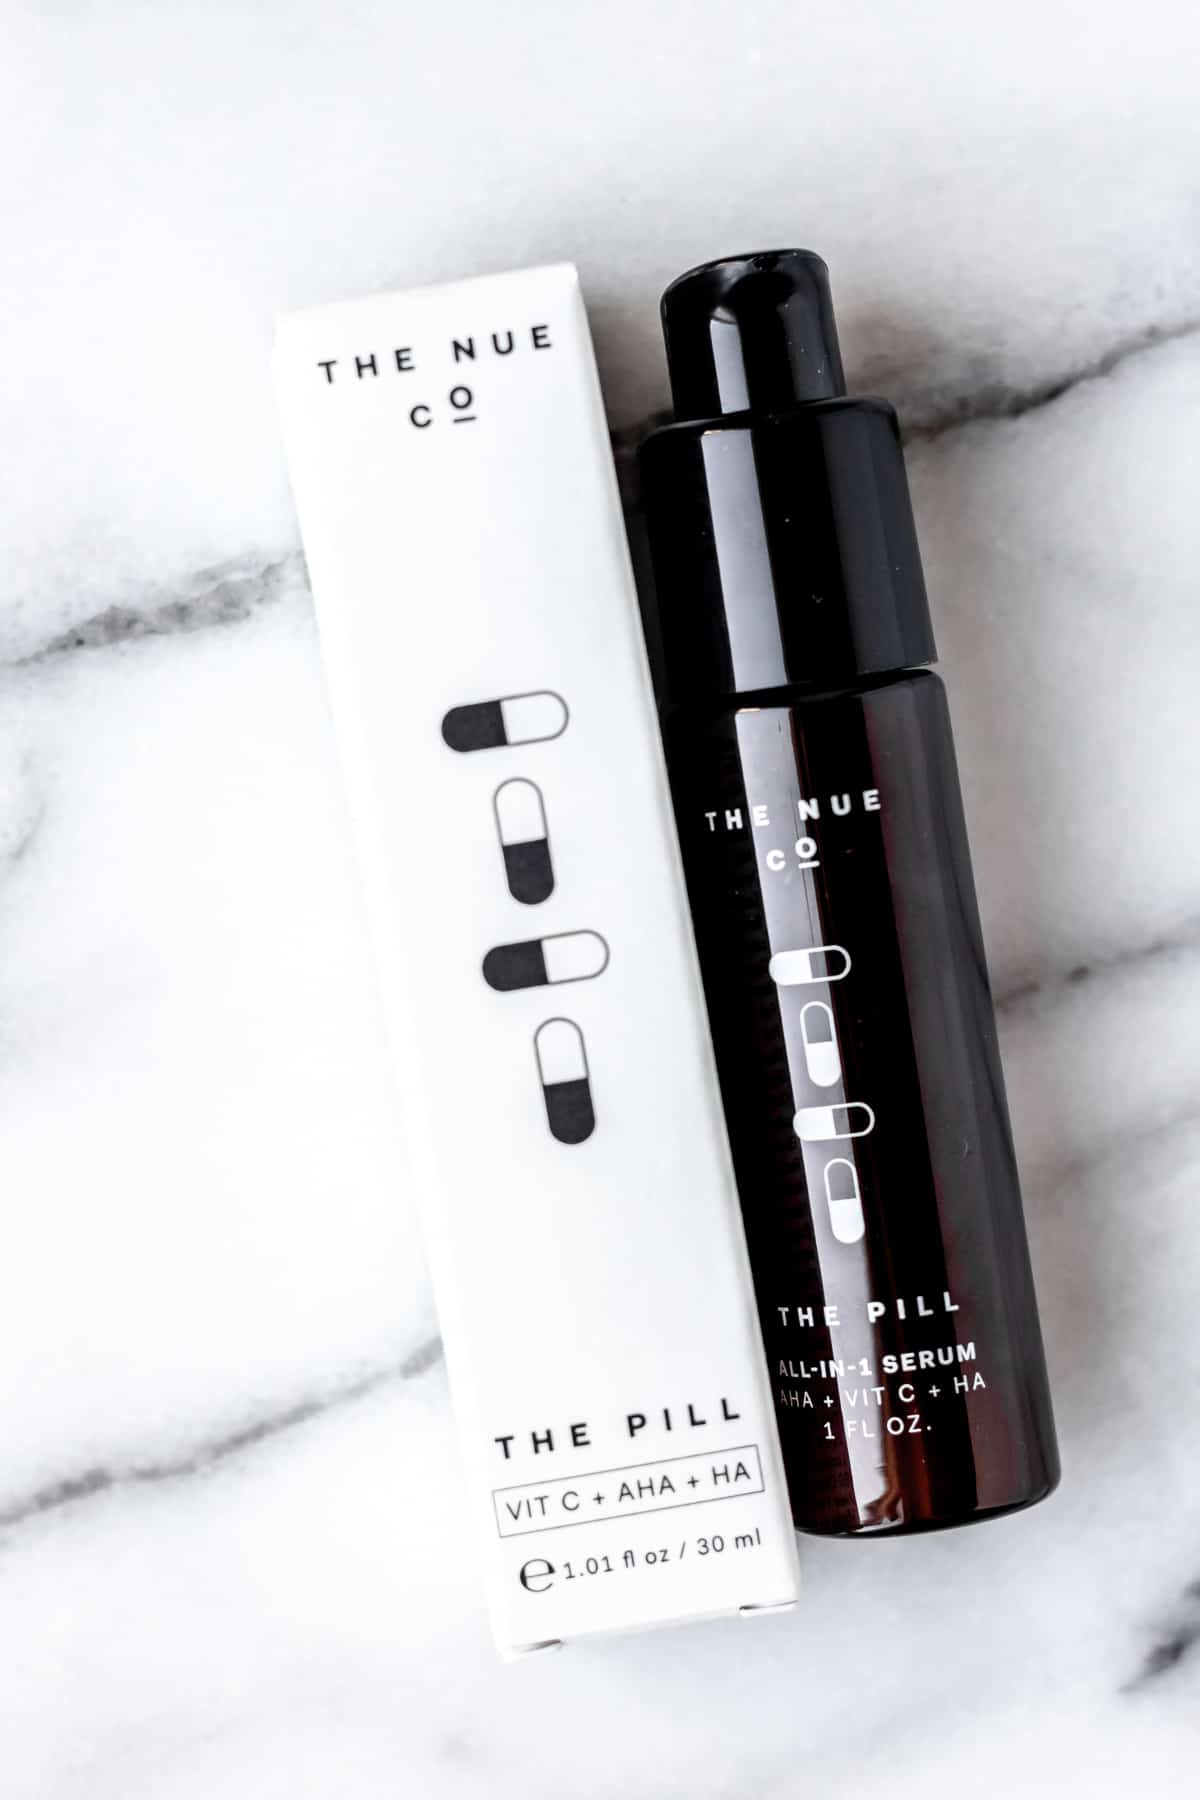 THE NUE CO The Pill All-In-One Serum bottle and box on a marble background.